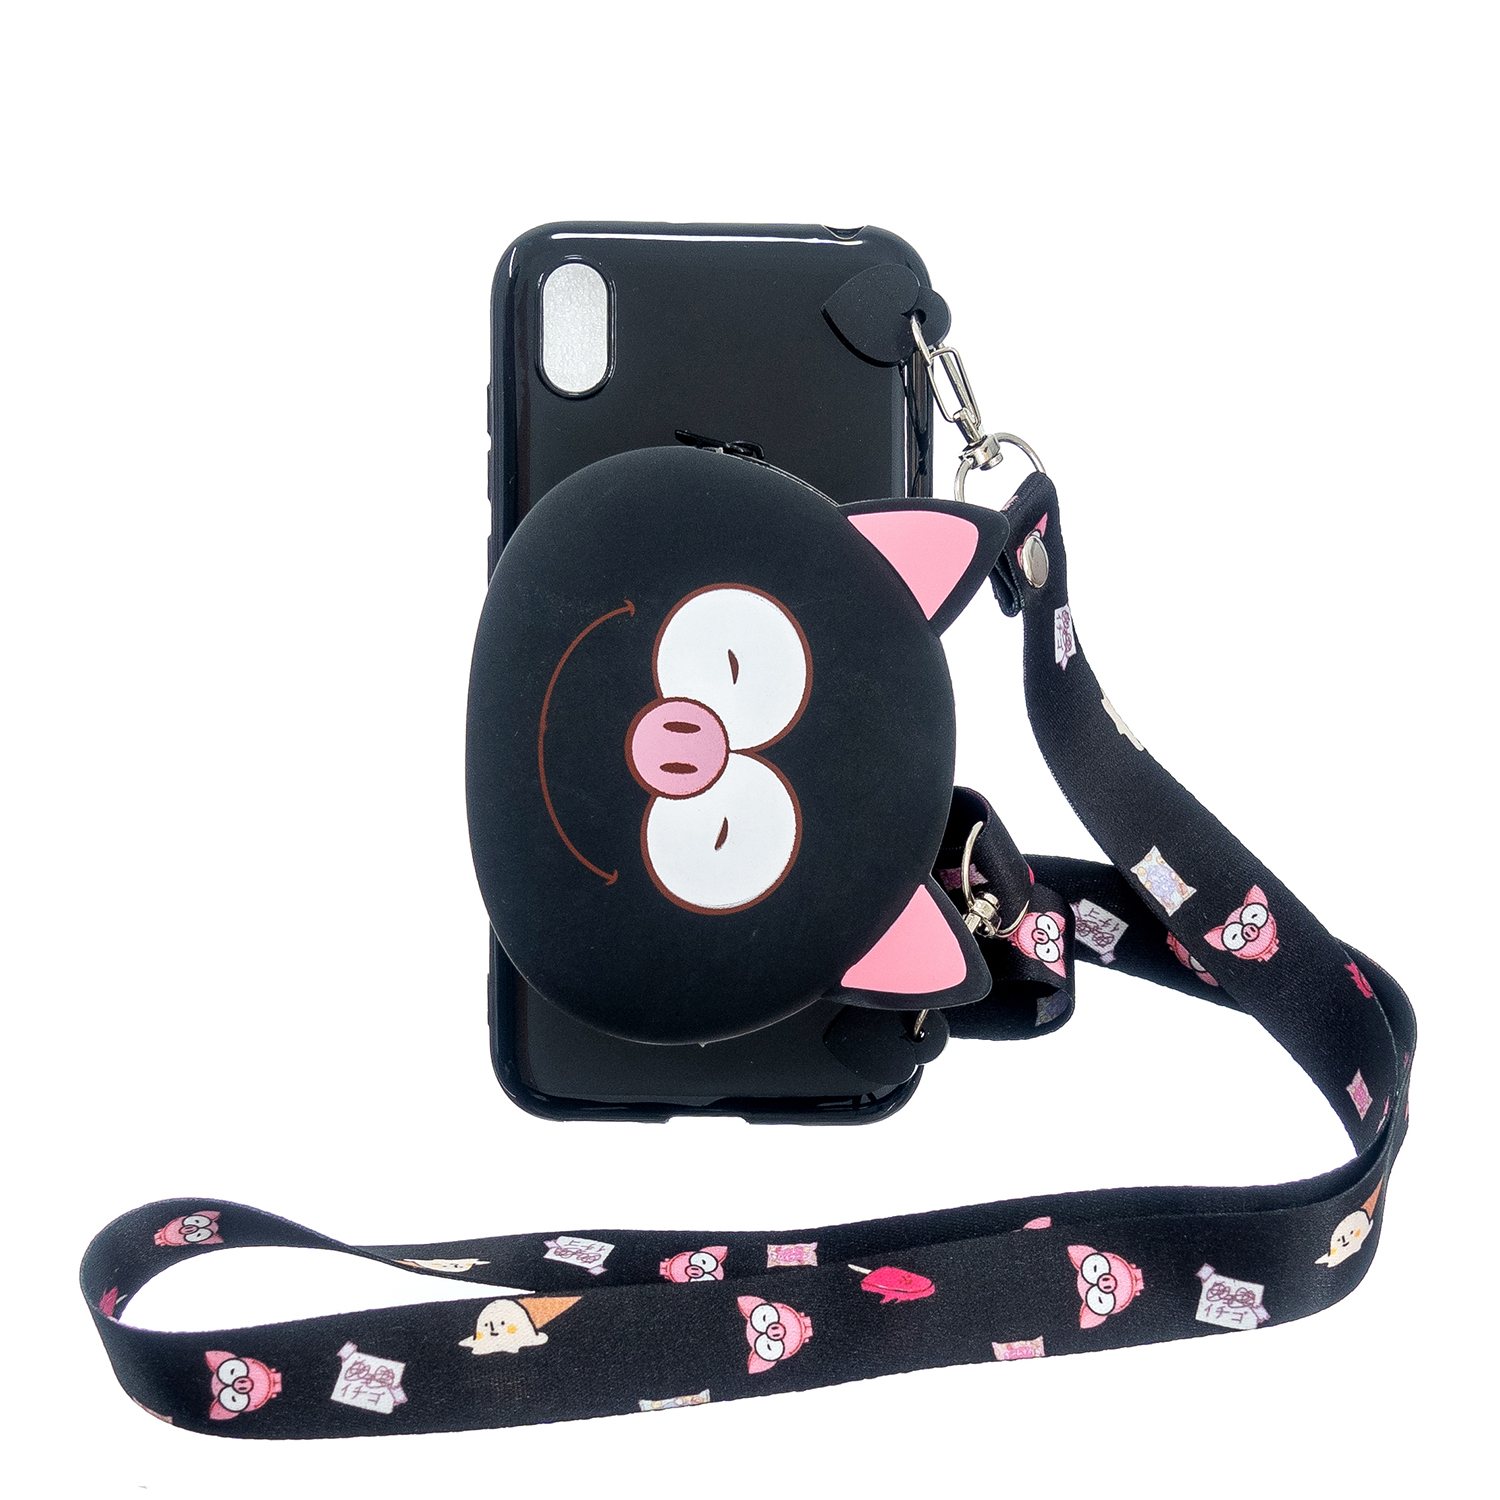 For HUAWEI Y5 2018/Y5 2019 Cellphone Case Mobile Phone Shell Shockproof TPU Cover with Cartoon Cat Pig Panda Coin Purse Lovely Shoulder Starp  Black